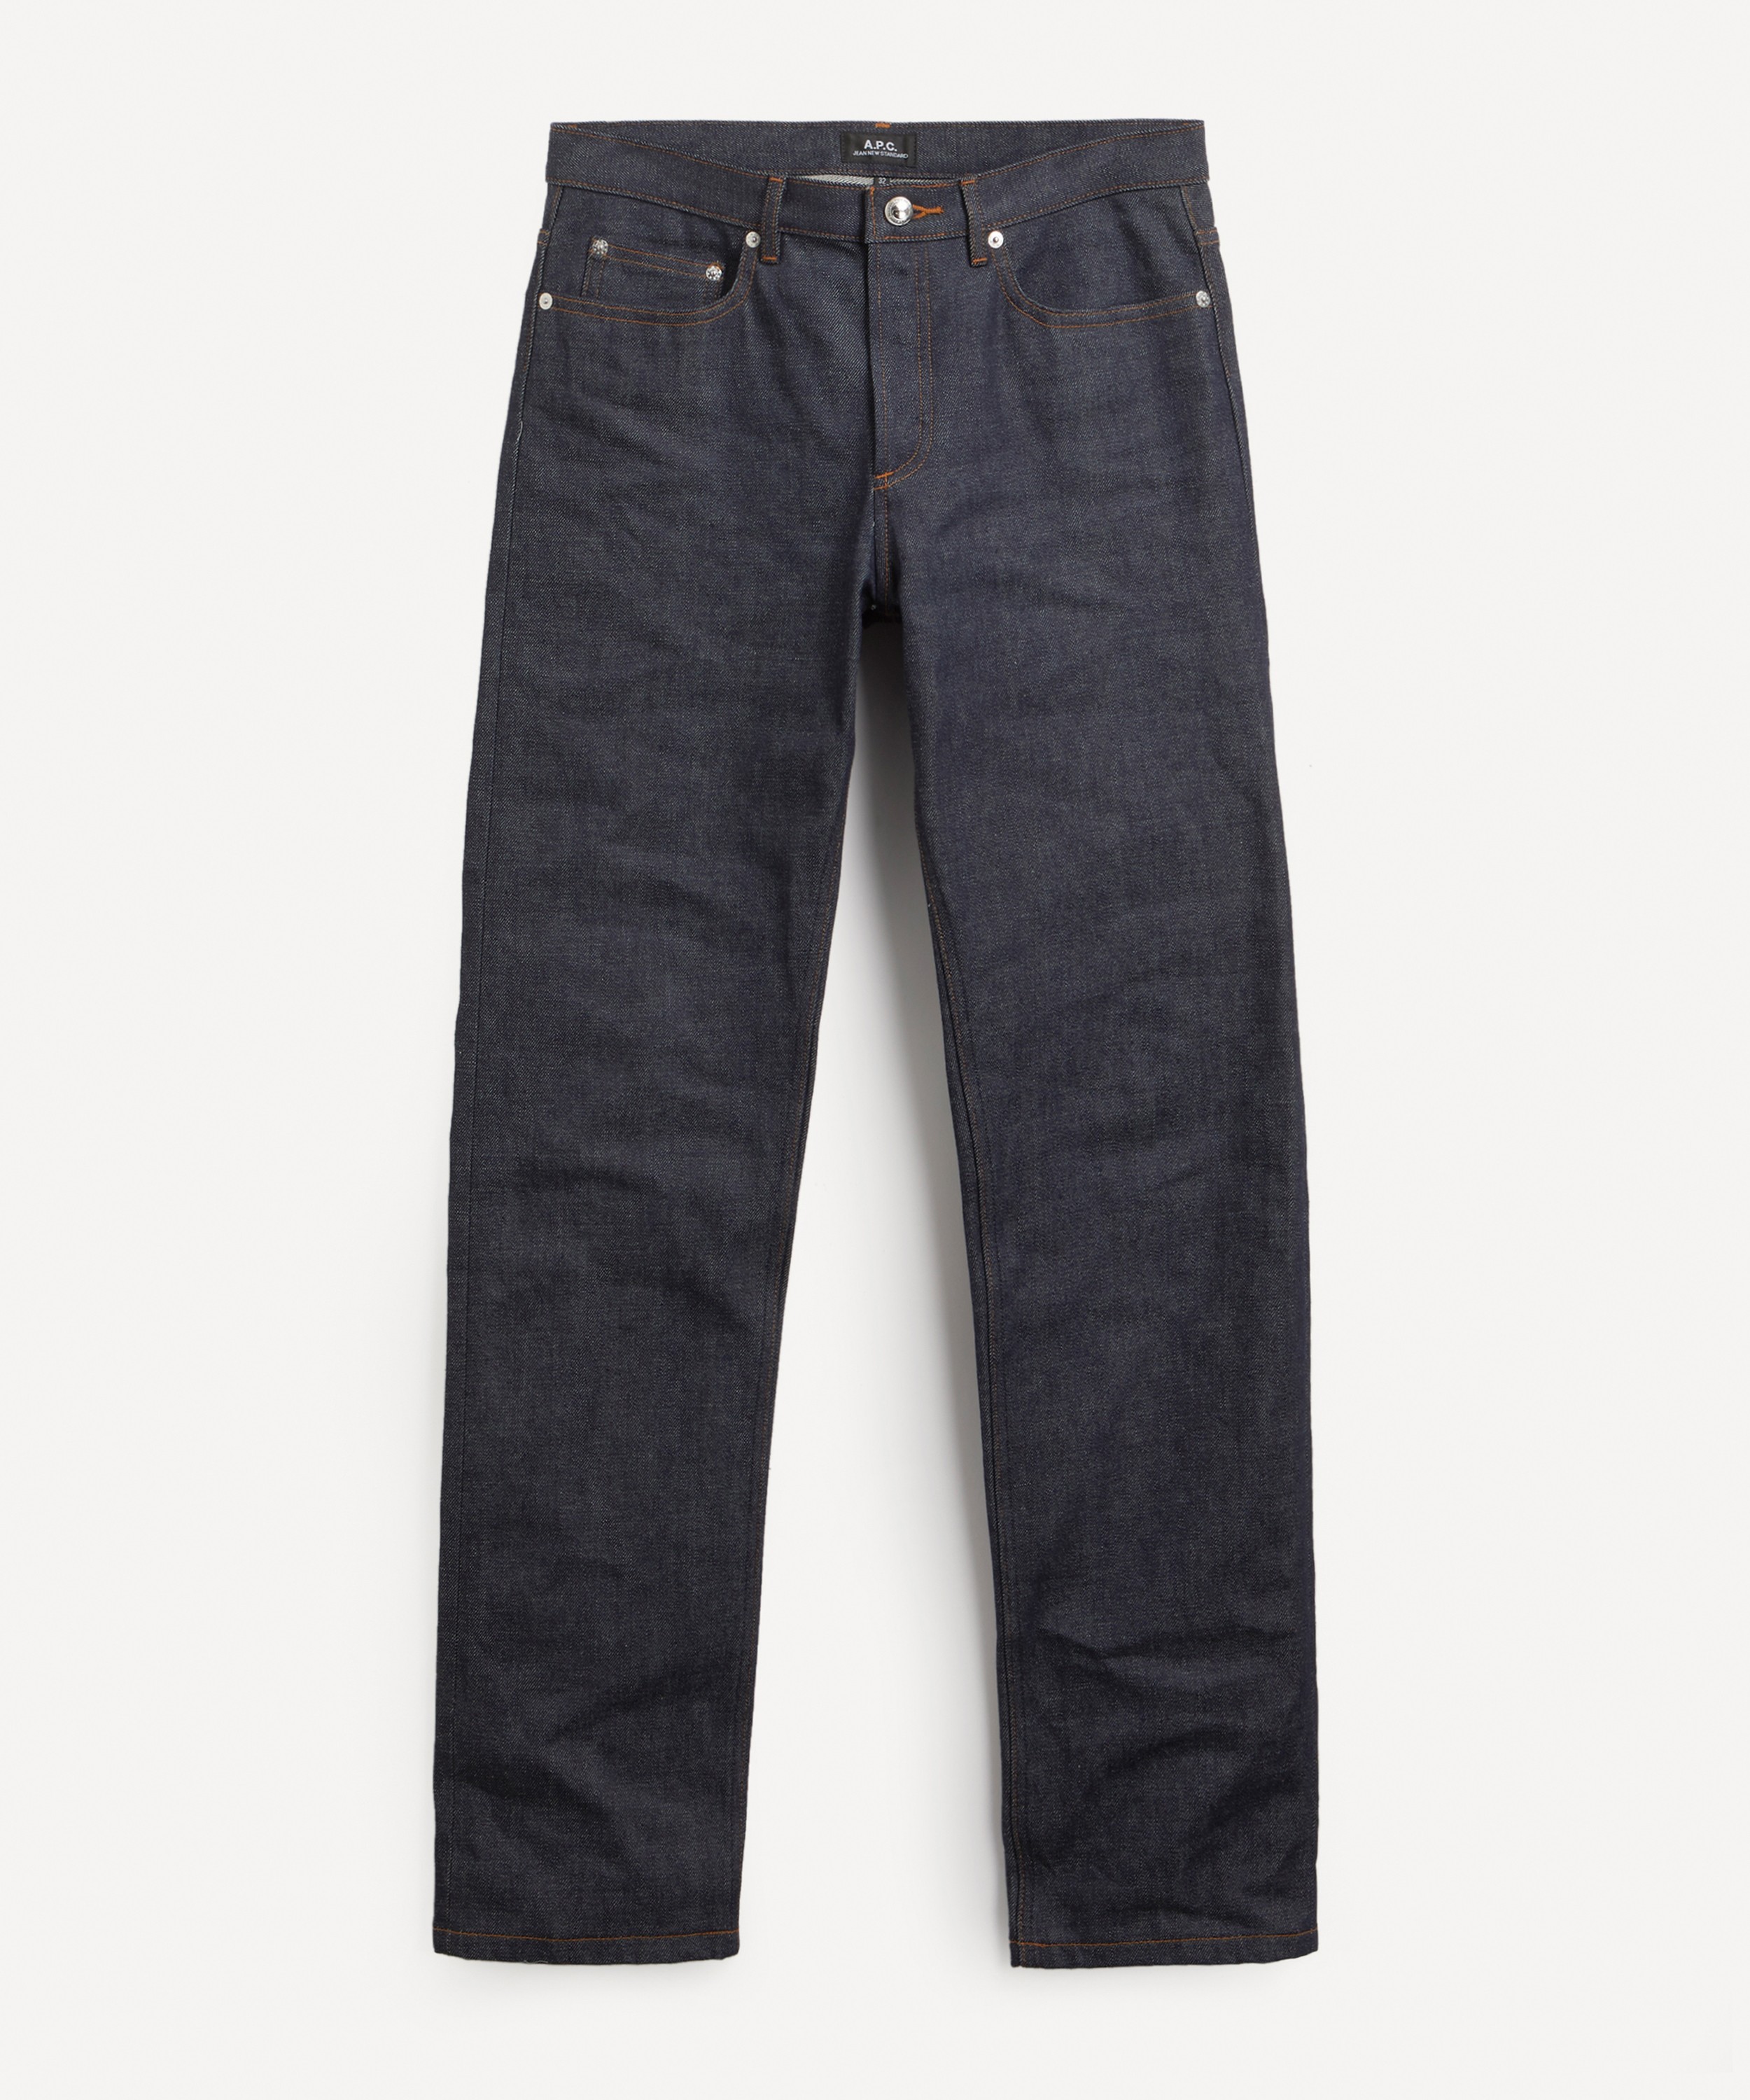 A.P.C. - New Standard Jeans